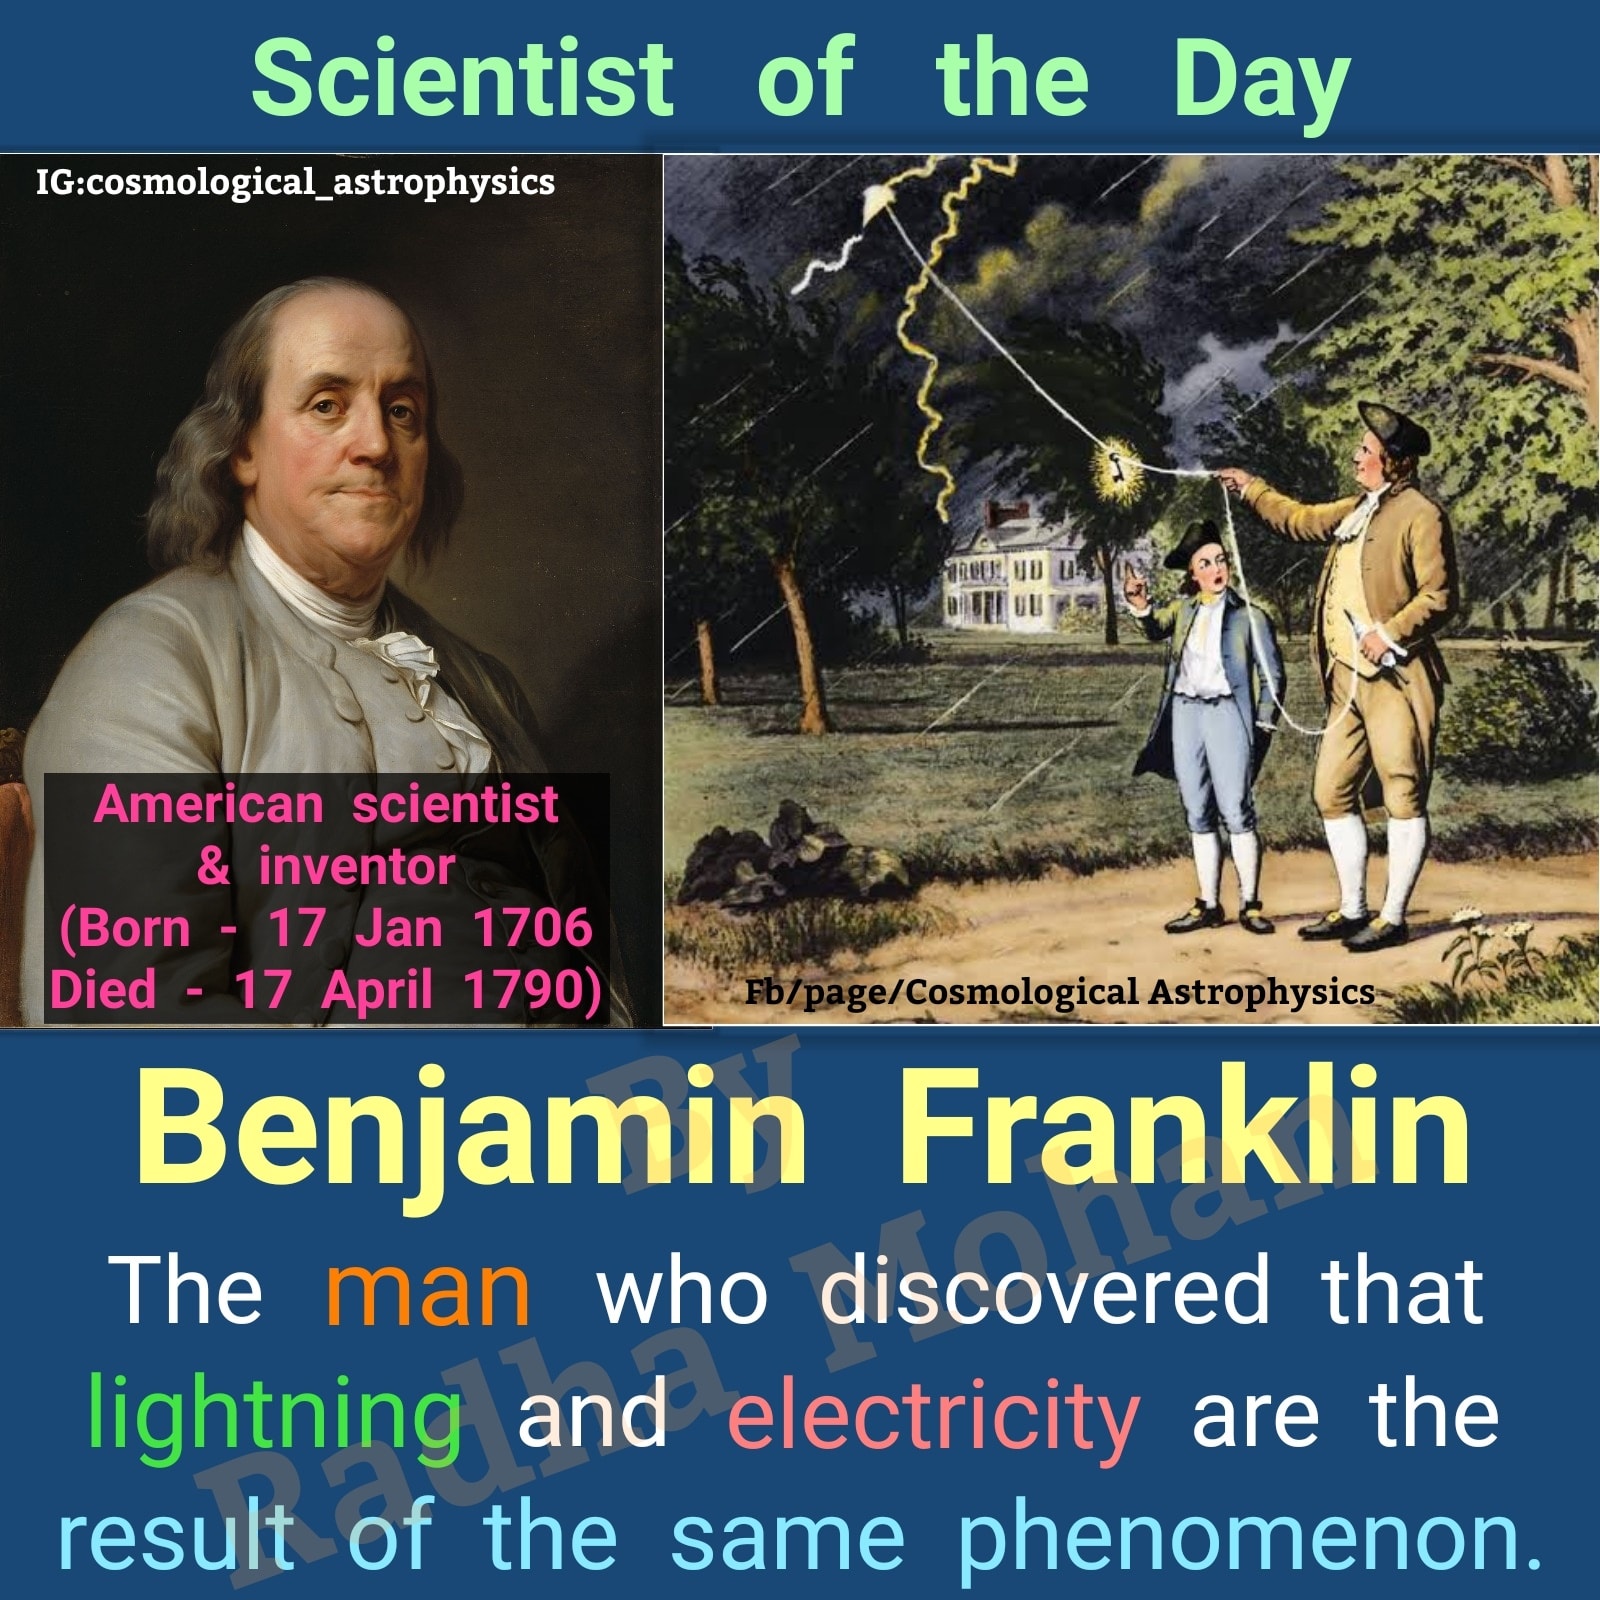 It's the birthday of #BenjaminFranklin, the man who made important